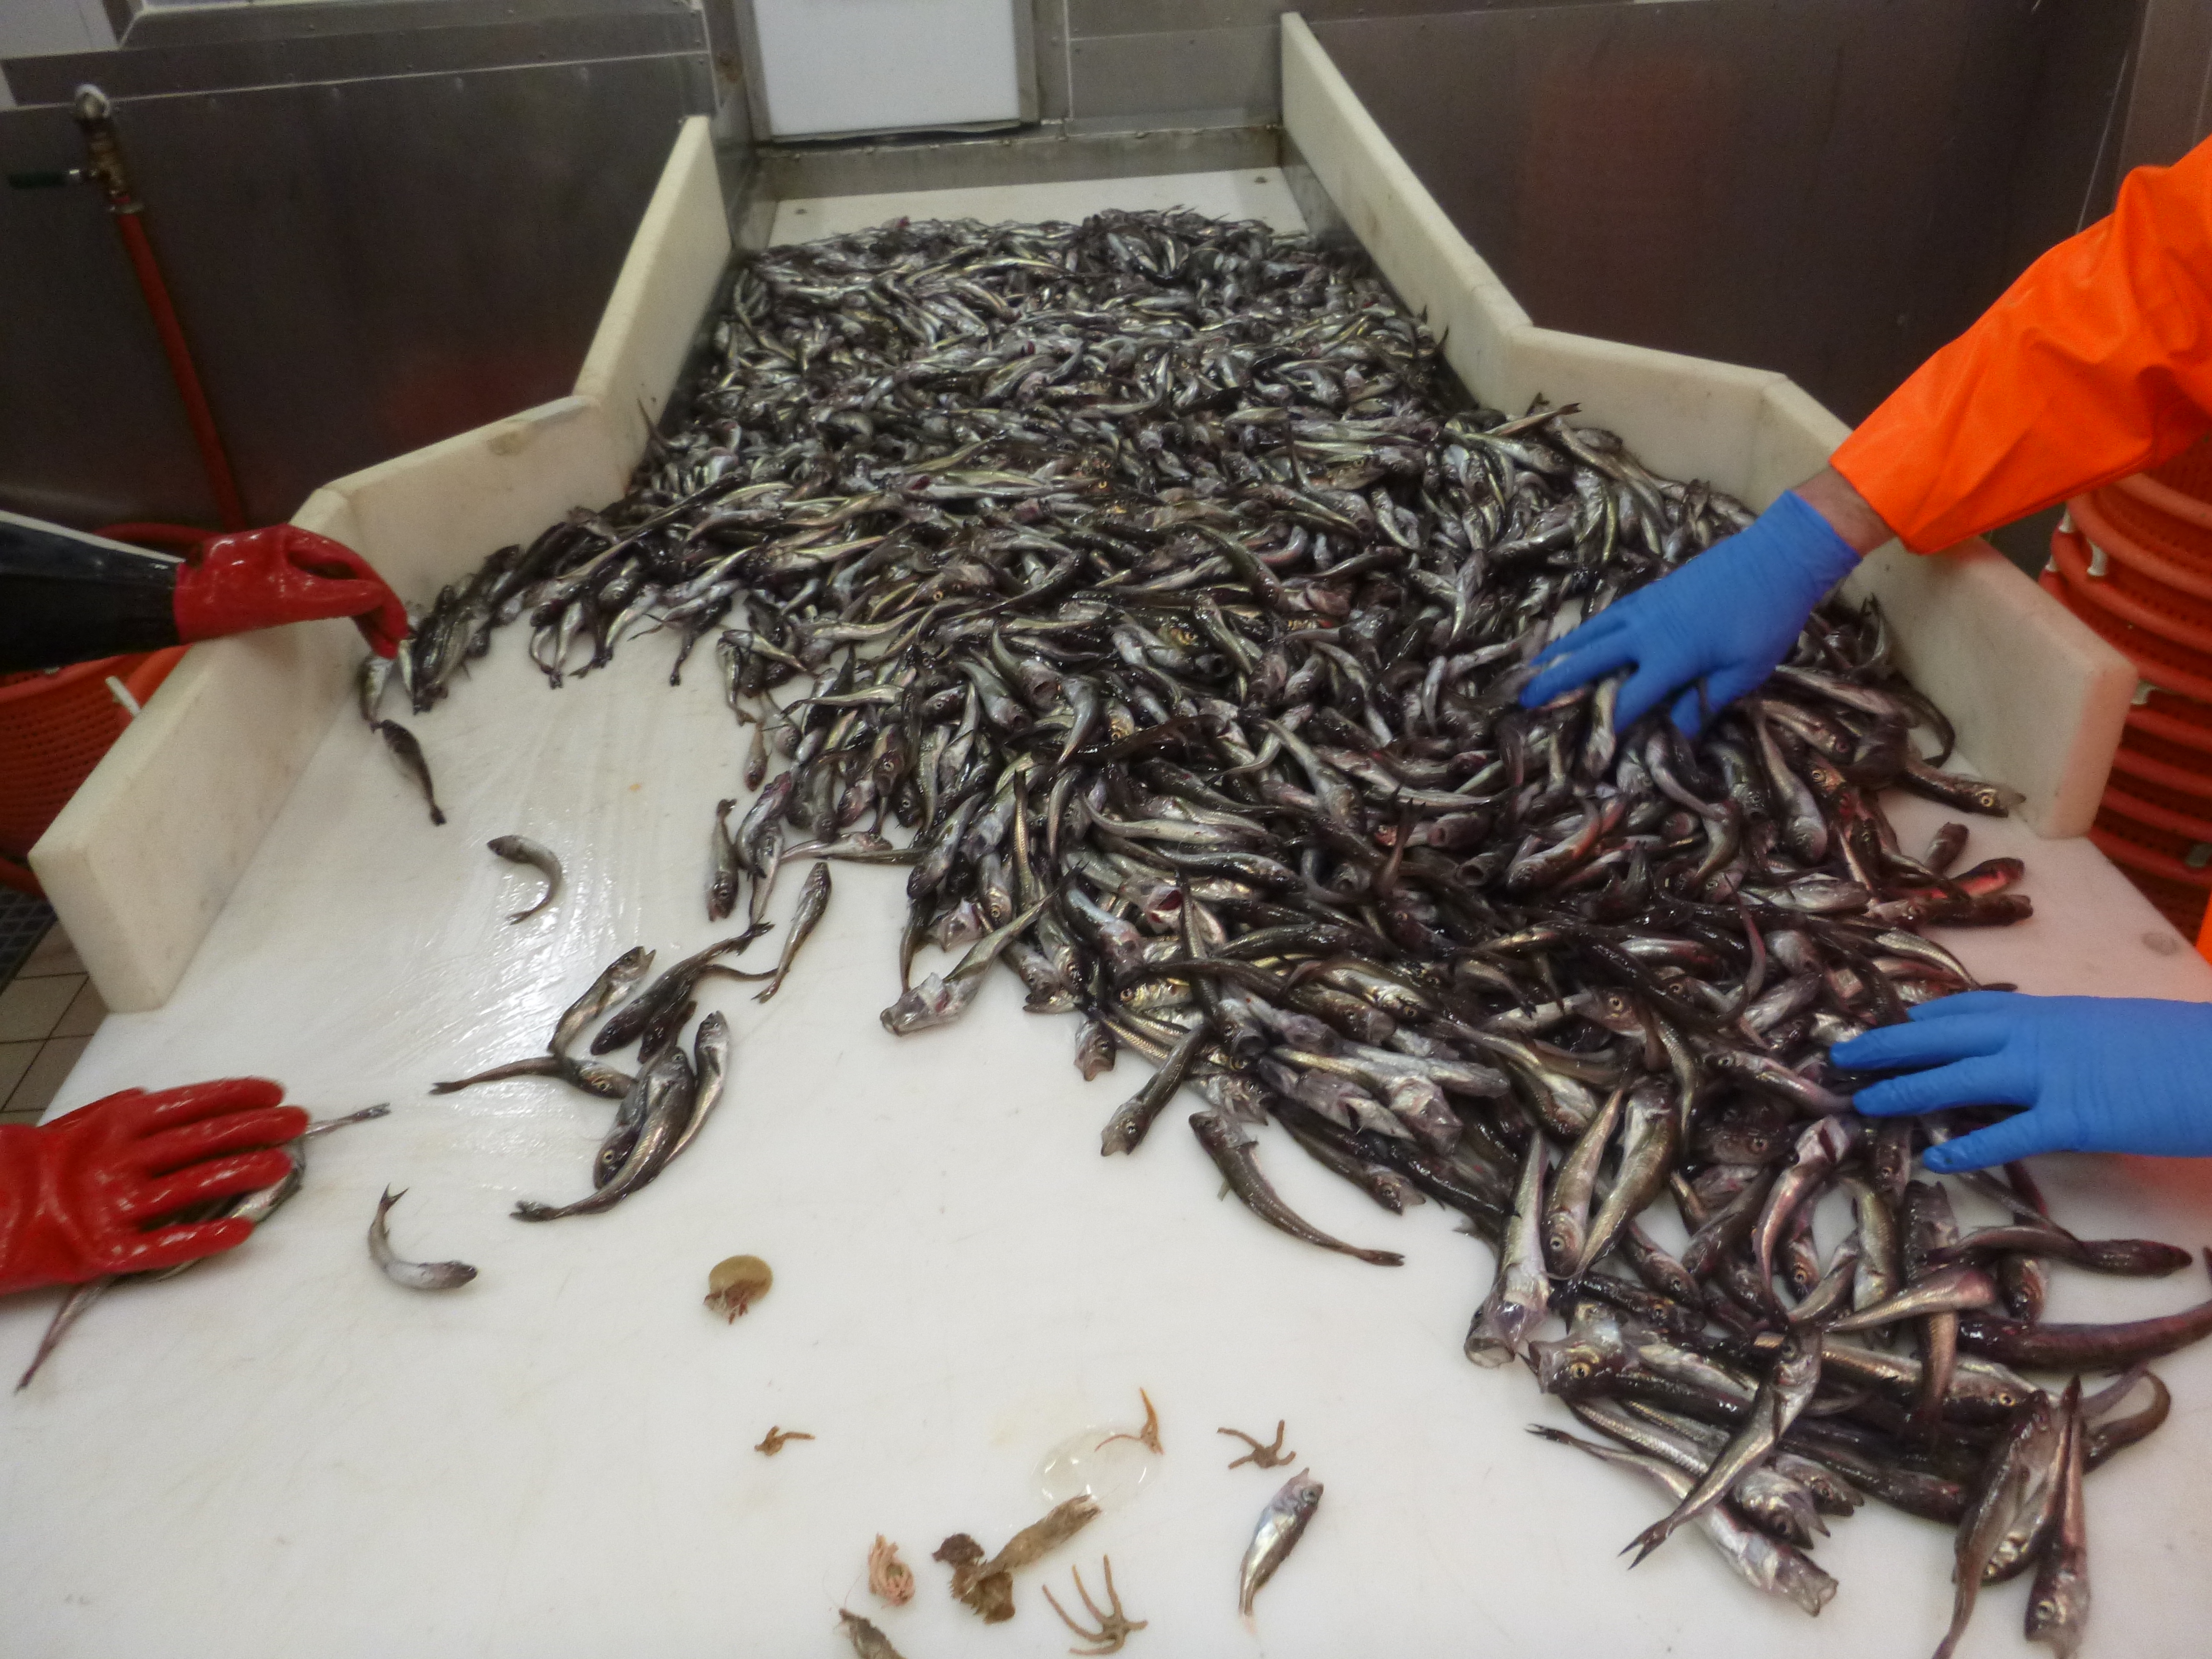 fish being sorted